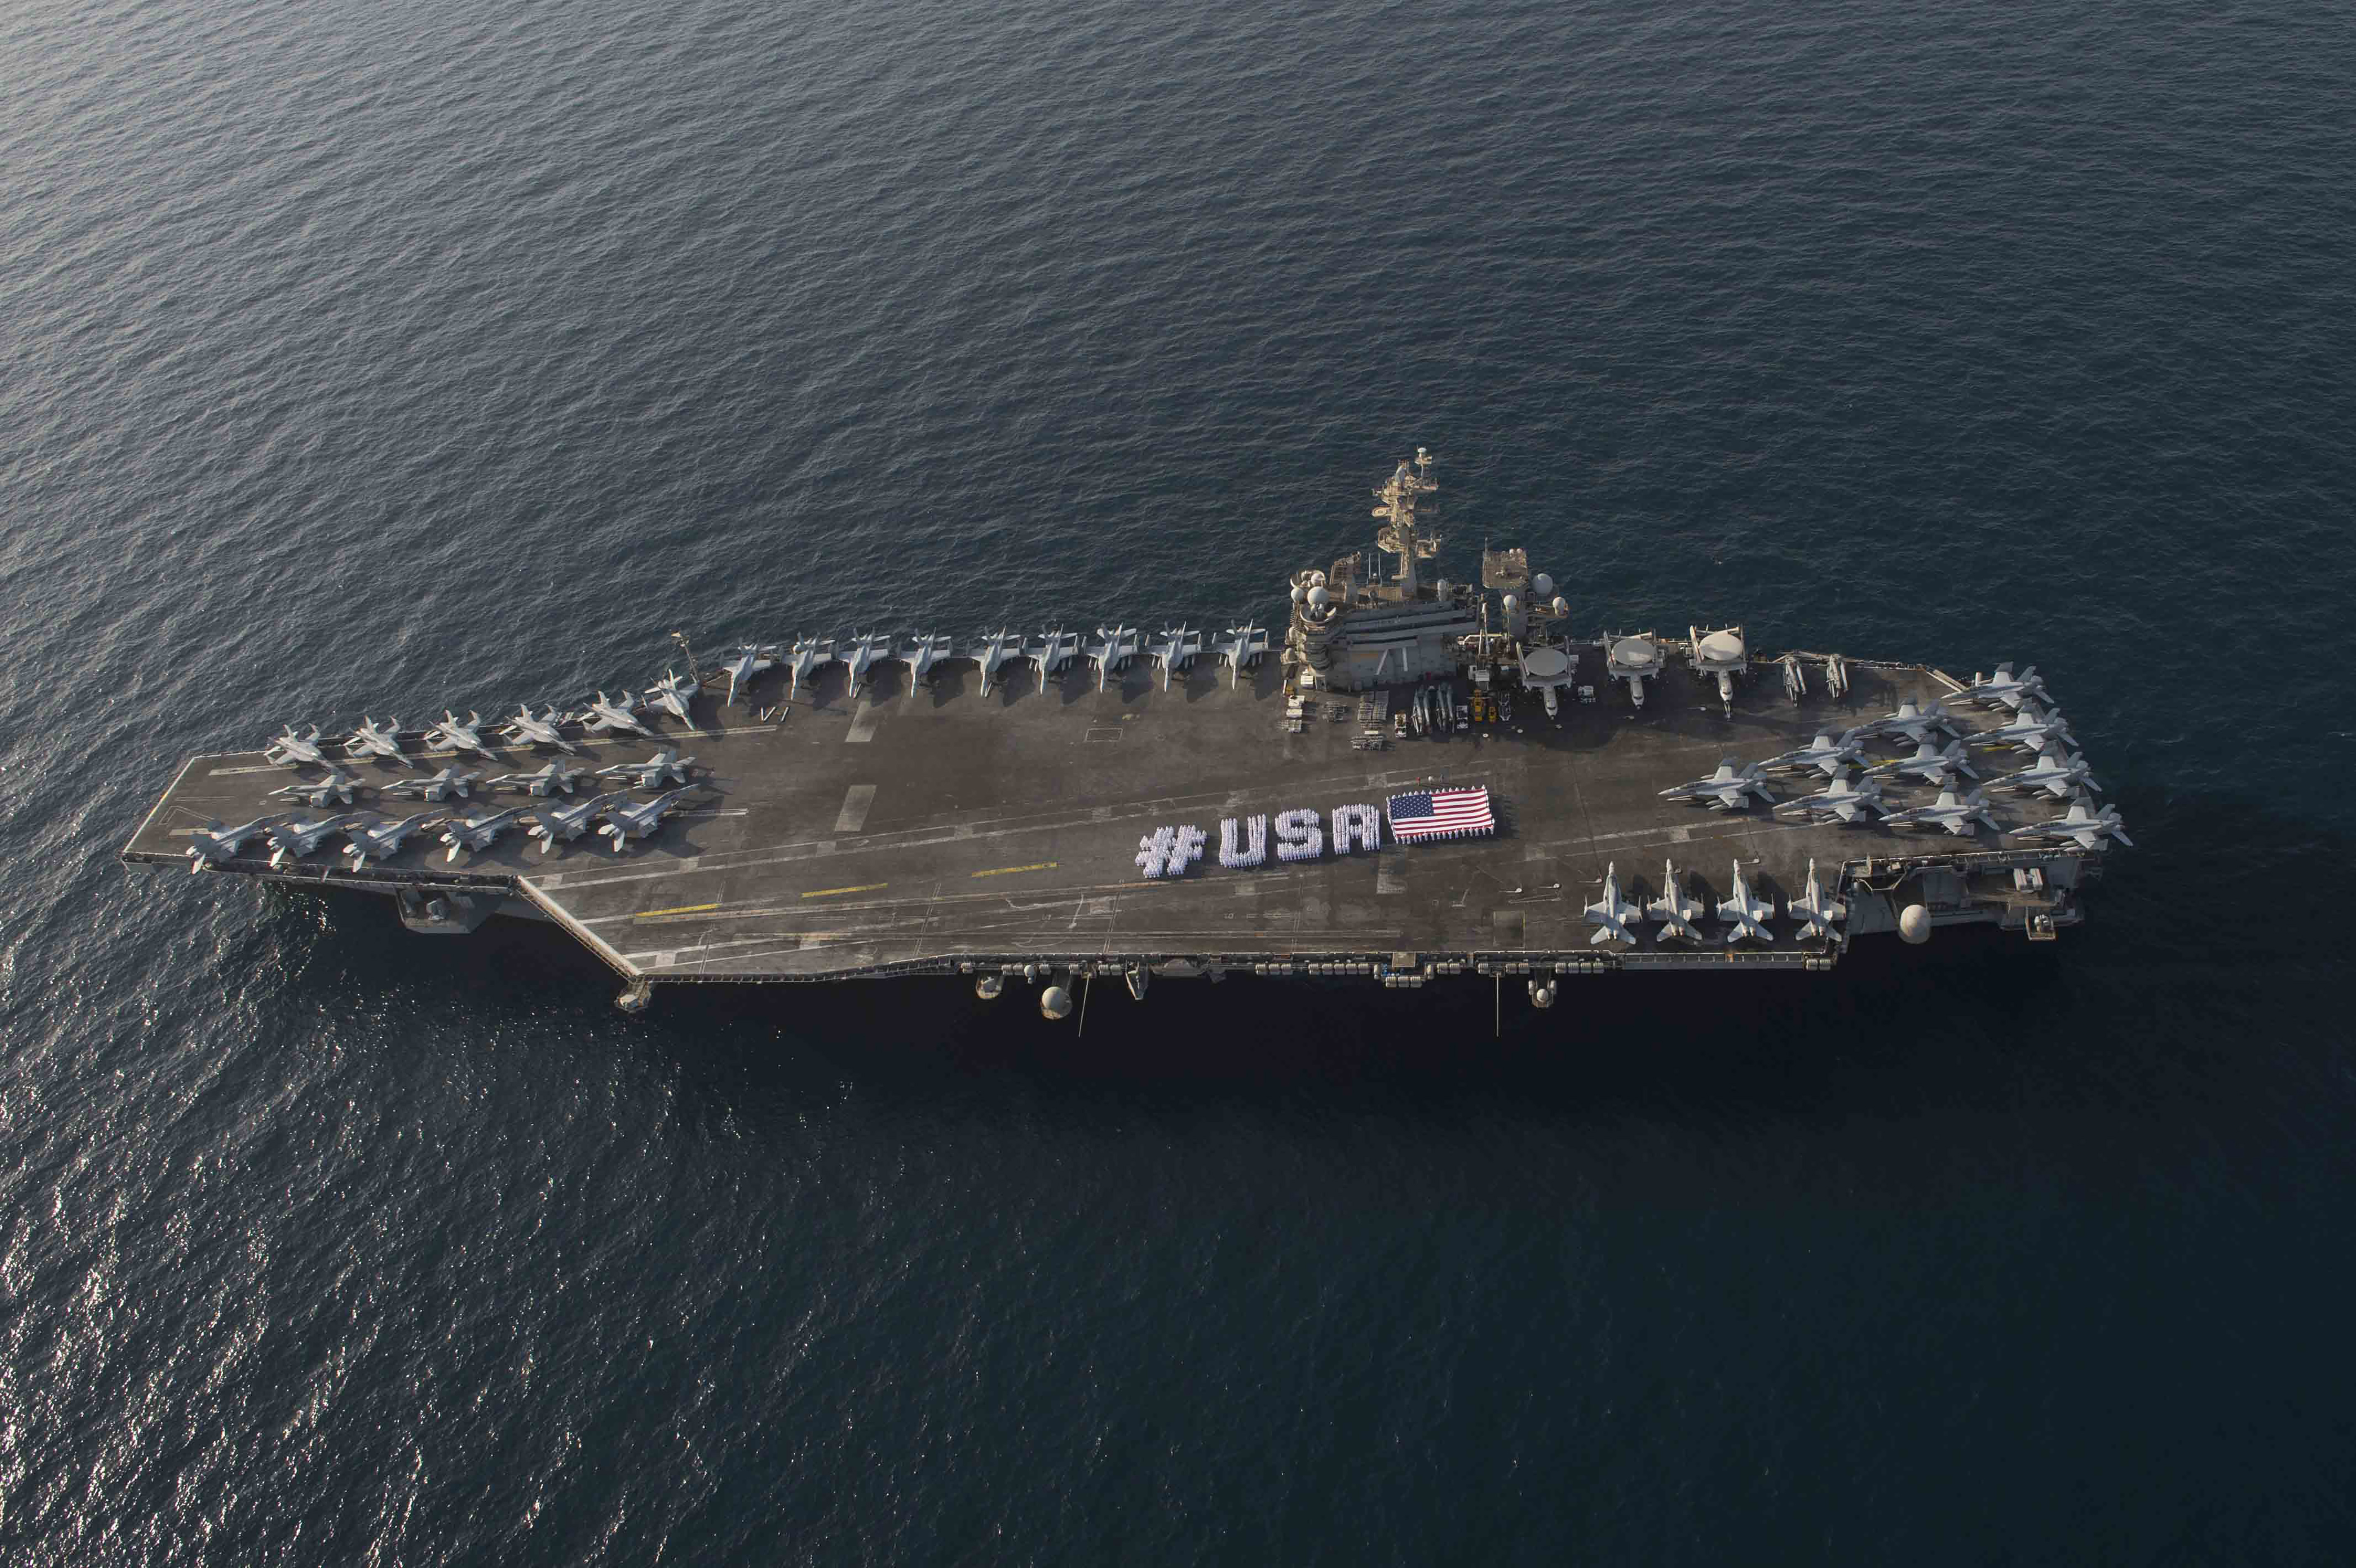 Sailors spell out #USA with the American flag on the flight deck of the aircraft carrier USS Theodore Roosevelt in honor of the nation's upcoming Independence Day weekend on June 28, 2015. US Navy Photo